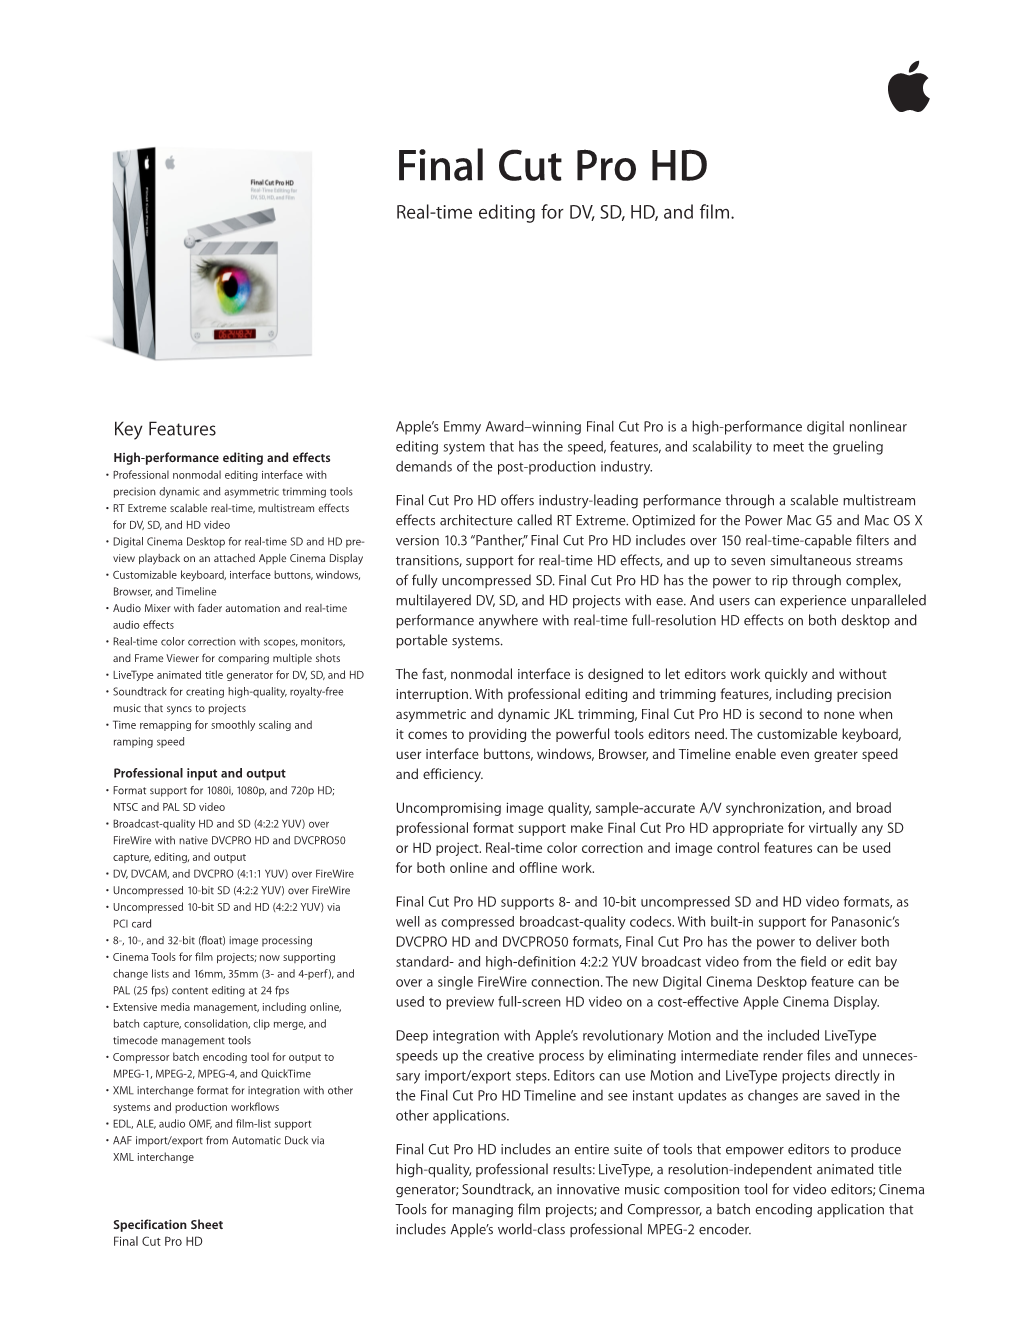 Final Cut Pro HD Real-Time Editing for DV, SD, HD, and Film